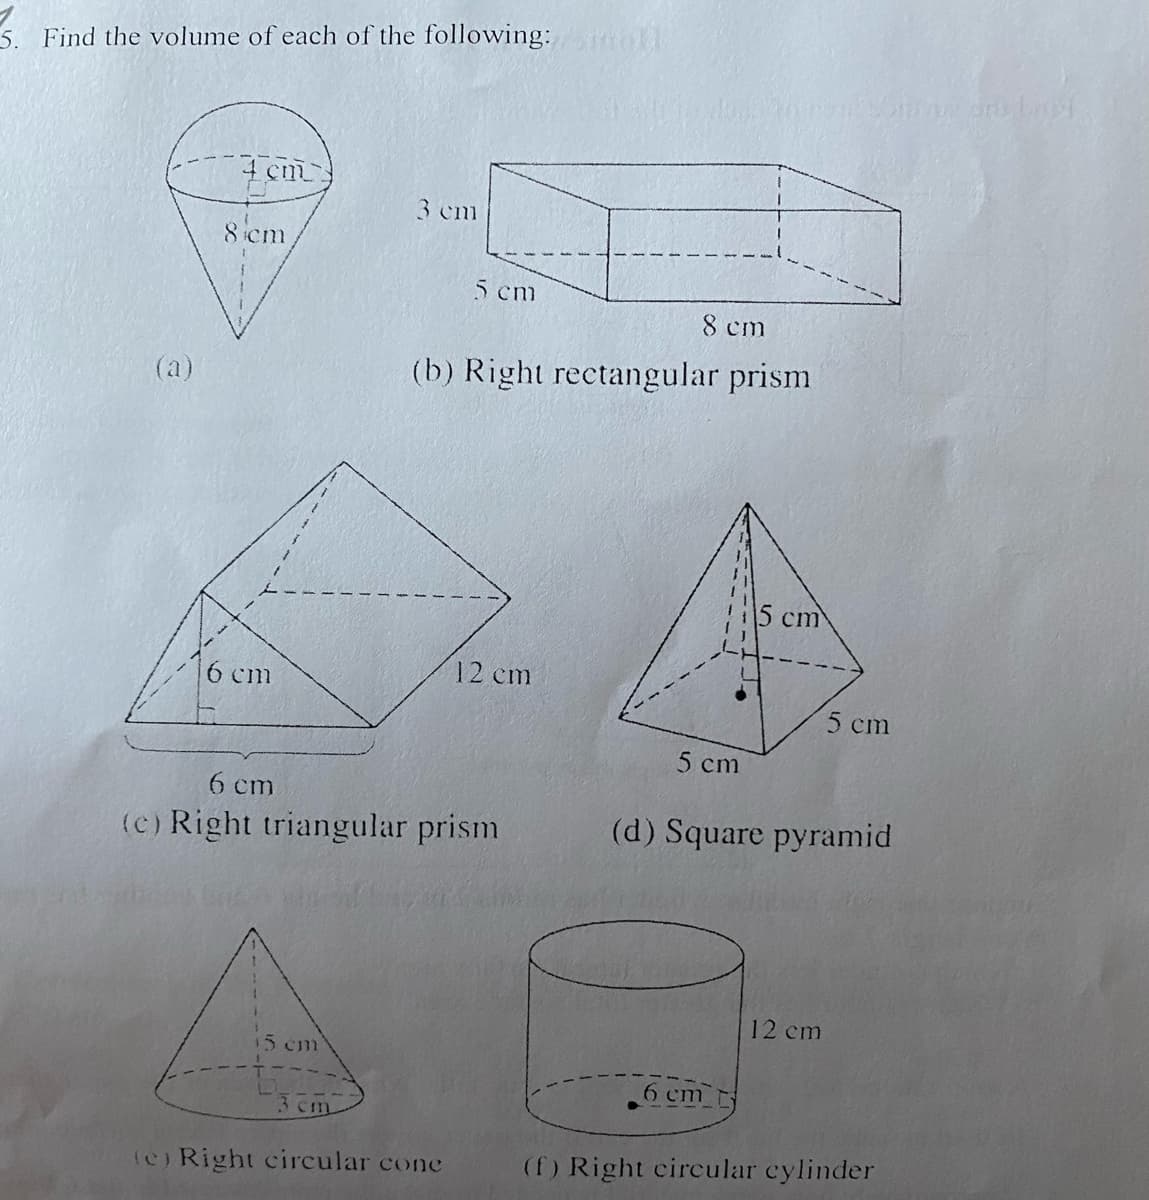 Find the volume of each of the following: mo
4 cm
8 cm
6 cm
15 cm
3 cm
3 cm
5 cm
8 cm
(b) Right rectangular prism
6 cm
(c) Right triangular prism
(e) Right circular cone
12 cm
5 cm
5 cm
6 cm
(d) Square pyramid
12 cm
Shout am bagi
5 cm
(f) Right circular cylinder